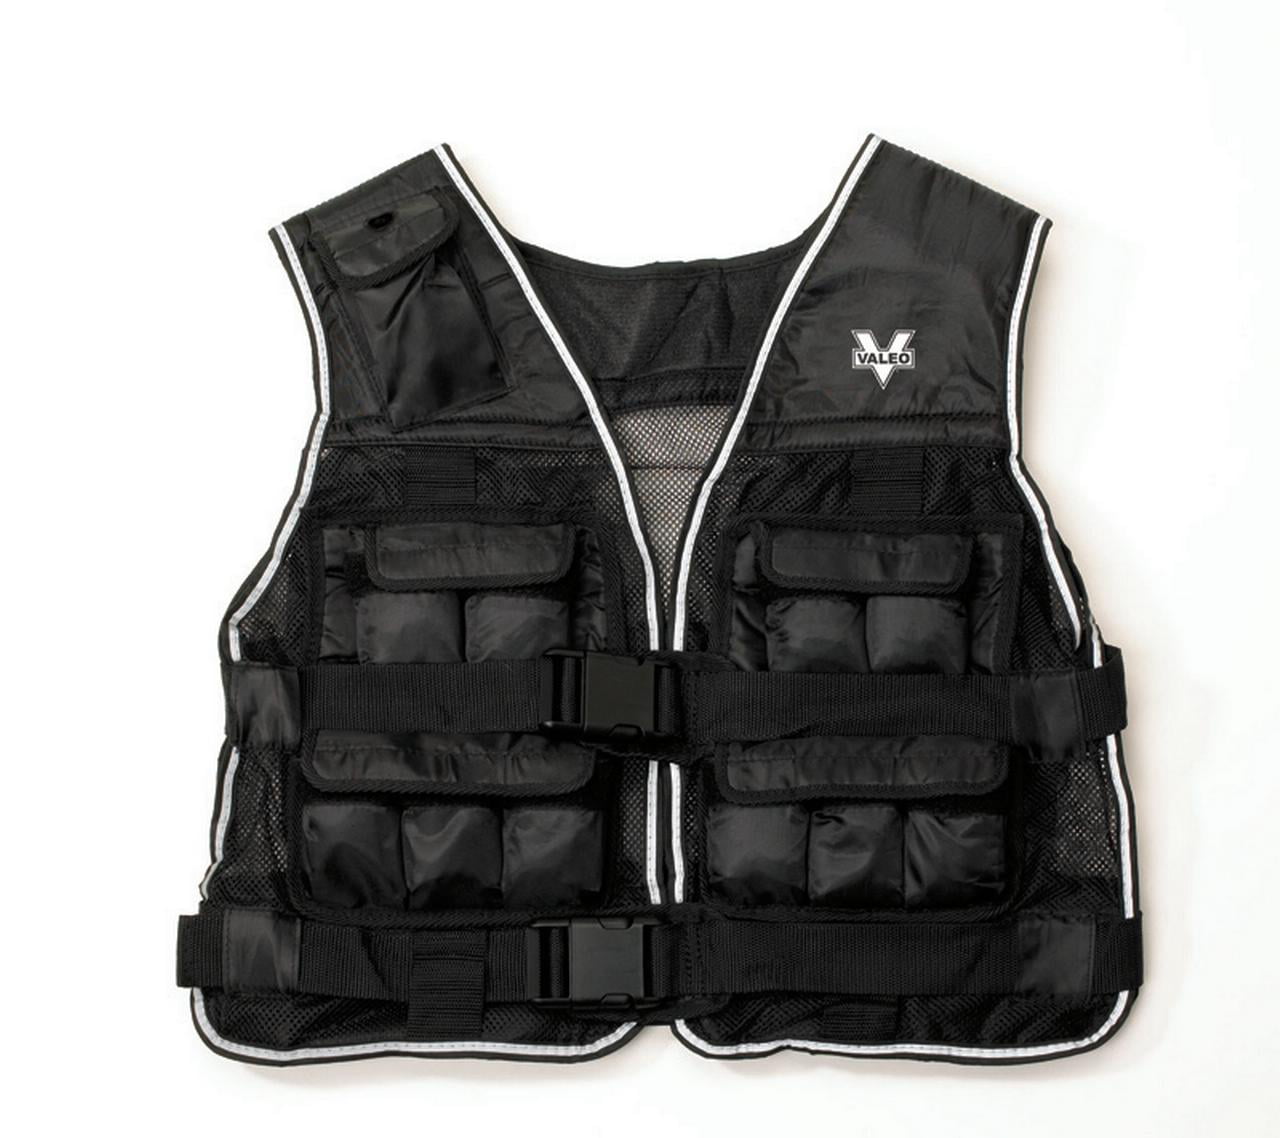 Valeo 20-Pound Weighted Vest With Removable 1 Pound Packs To Adjust From 1 To 20 